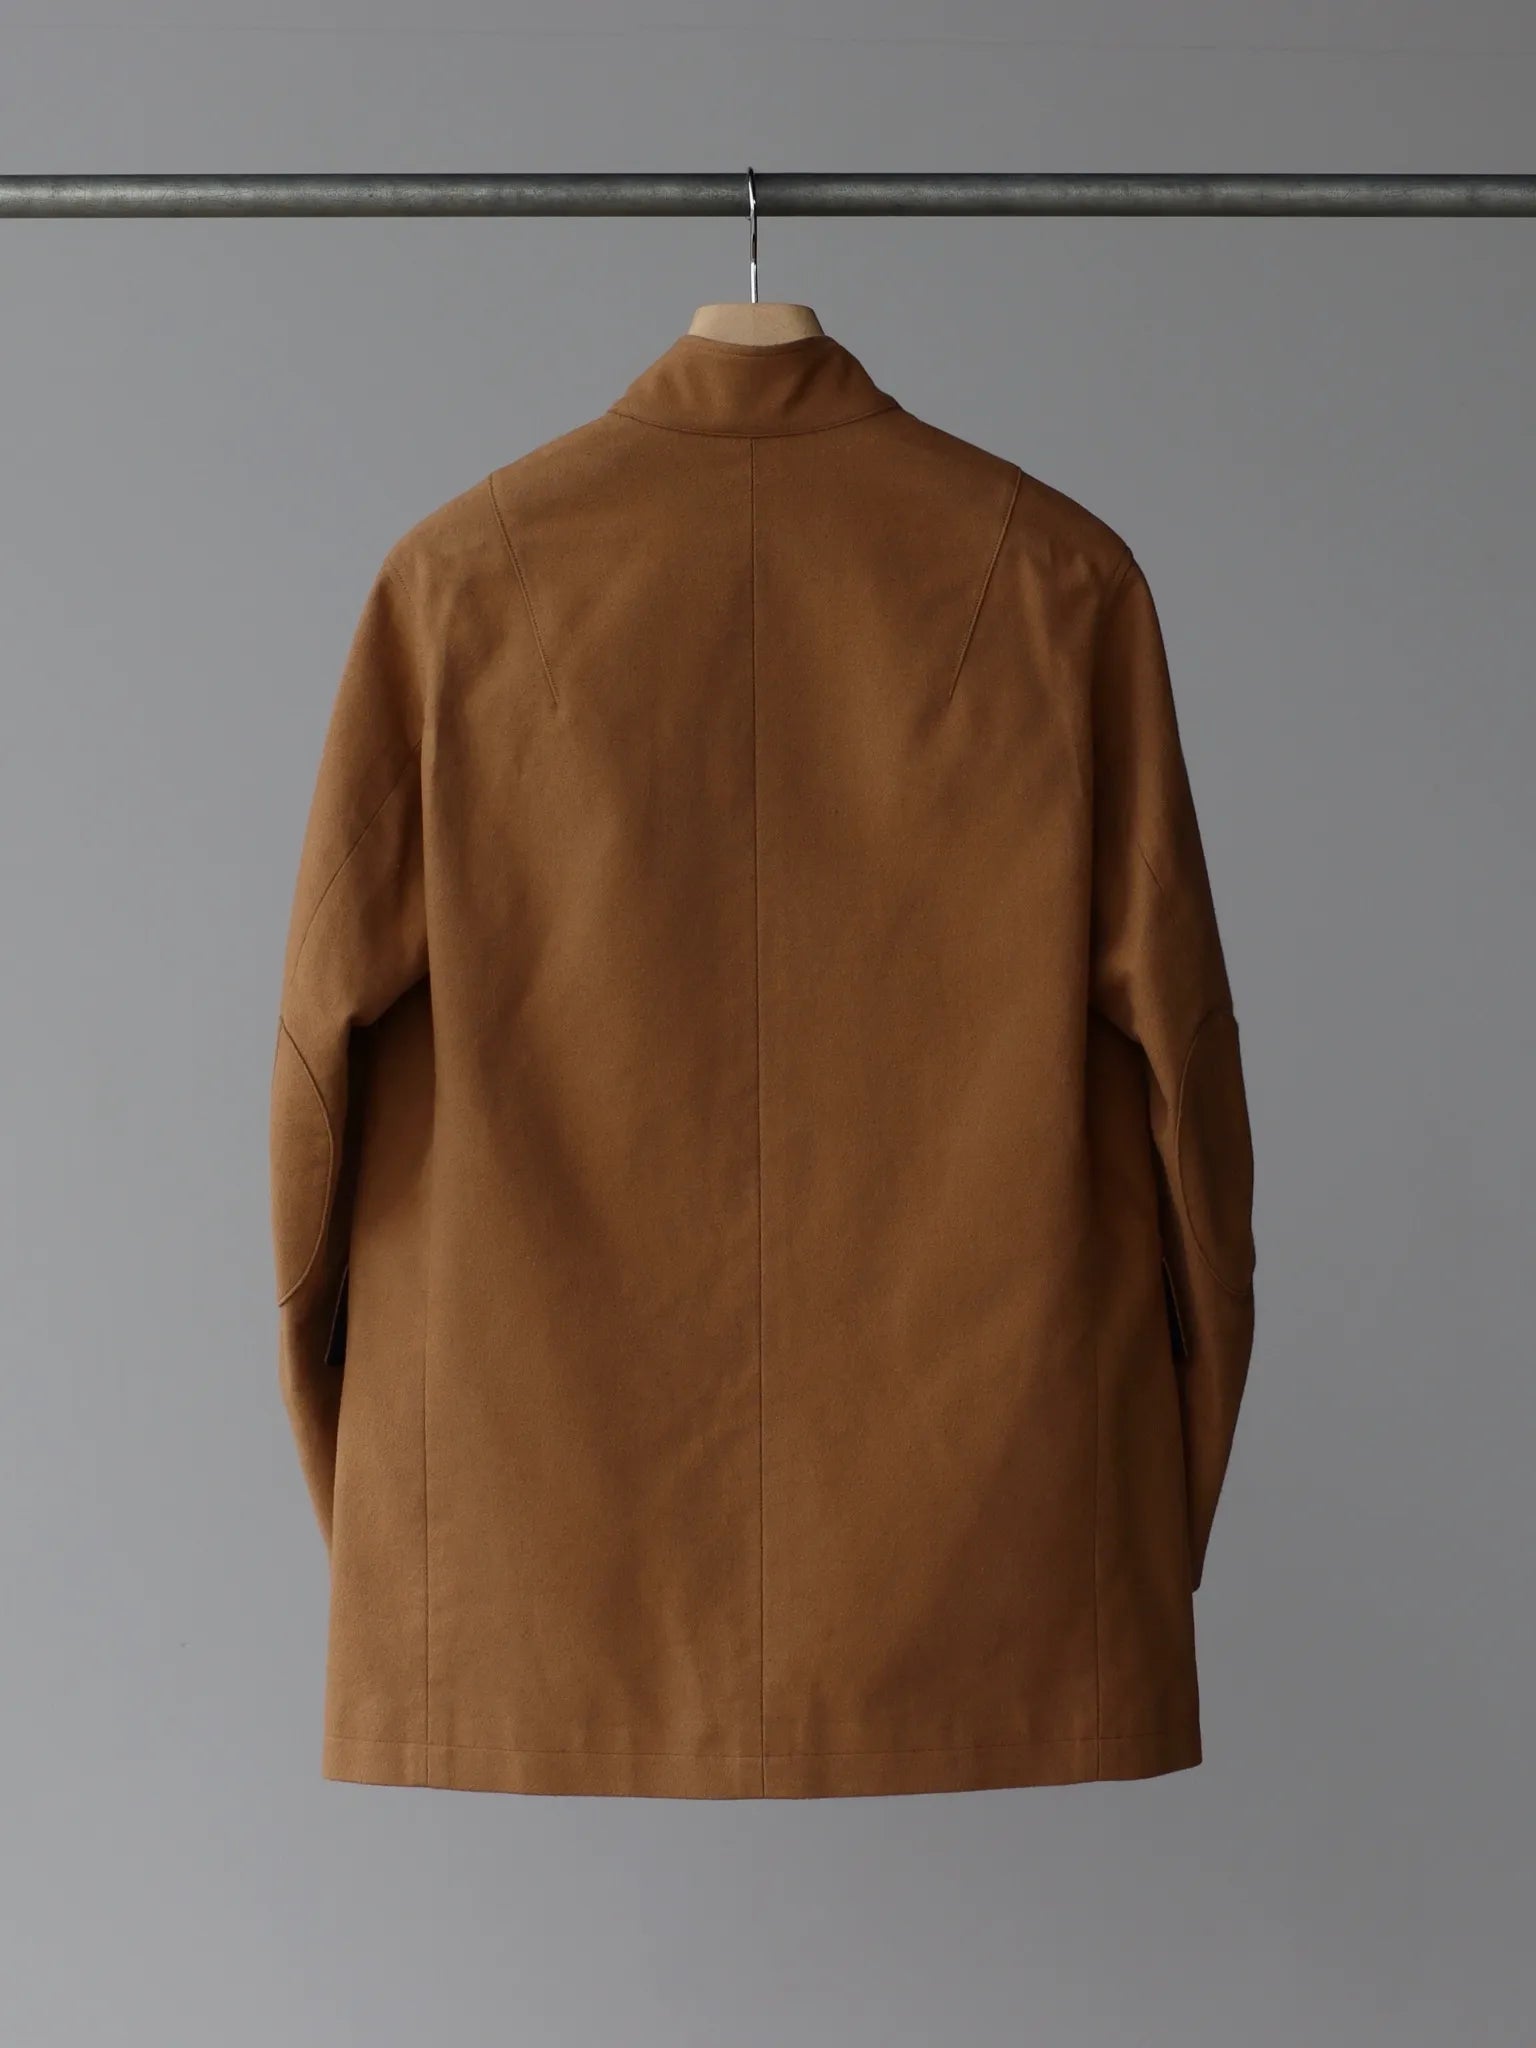 tilt-the-authentics-high-density-chambray-cotton-suede-french-jacket-navy-ocher-4